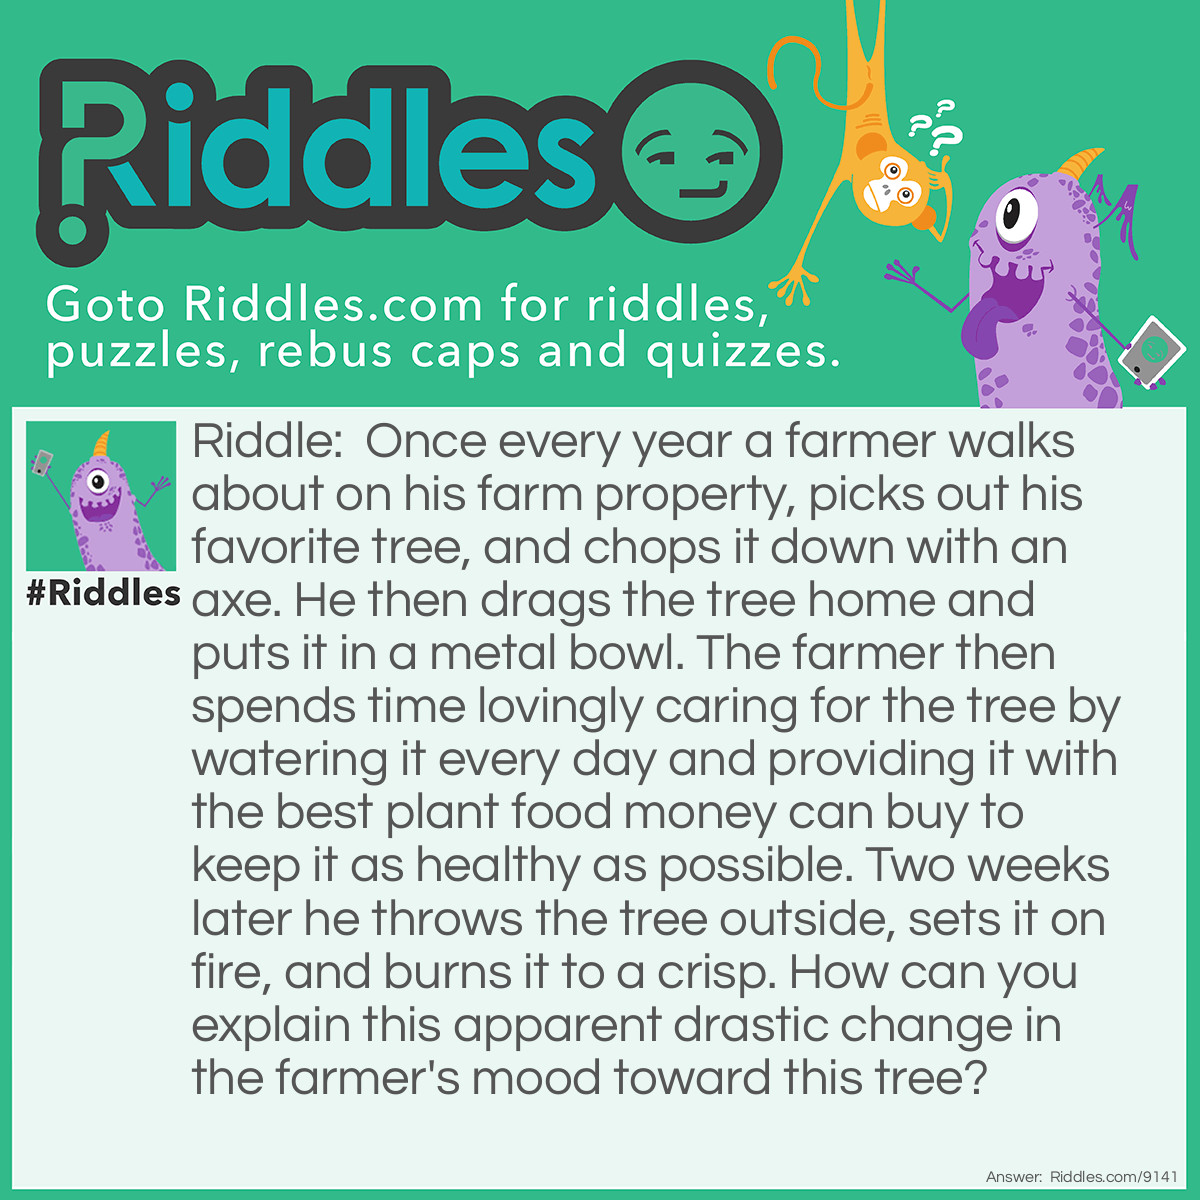 Riddle: Once every year a farmer walks about on his farm property, picks out his favorite tree, and chops it down with an axe. He then drags the tree home and puts it in a metal bowl. The farmer then spends time lovingly caring for the tree by watering it every day and providing it with the best plant food money can buy to keep it as healthy as possible. Two weeks later he throws the tree outside, sets it on fire, and burns it to a crisp. How can you explain this apparent drastic change in the farmer's mood toward this tree? Answer: The man owns a Christmas tree farm where he grows thousands of Christmas trees for sale to the public. He is simply performing his annual Christmas ritual of selecting a tree, placing it in a tree stand, keeping it healthy for two weeks, and then disposing of it.